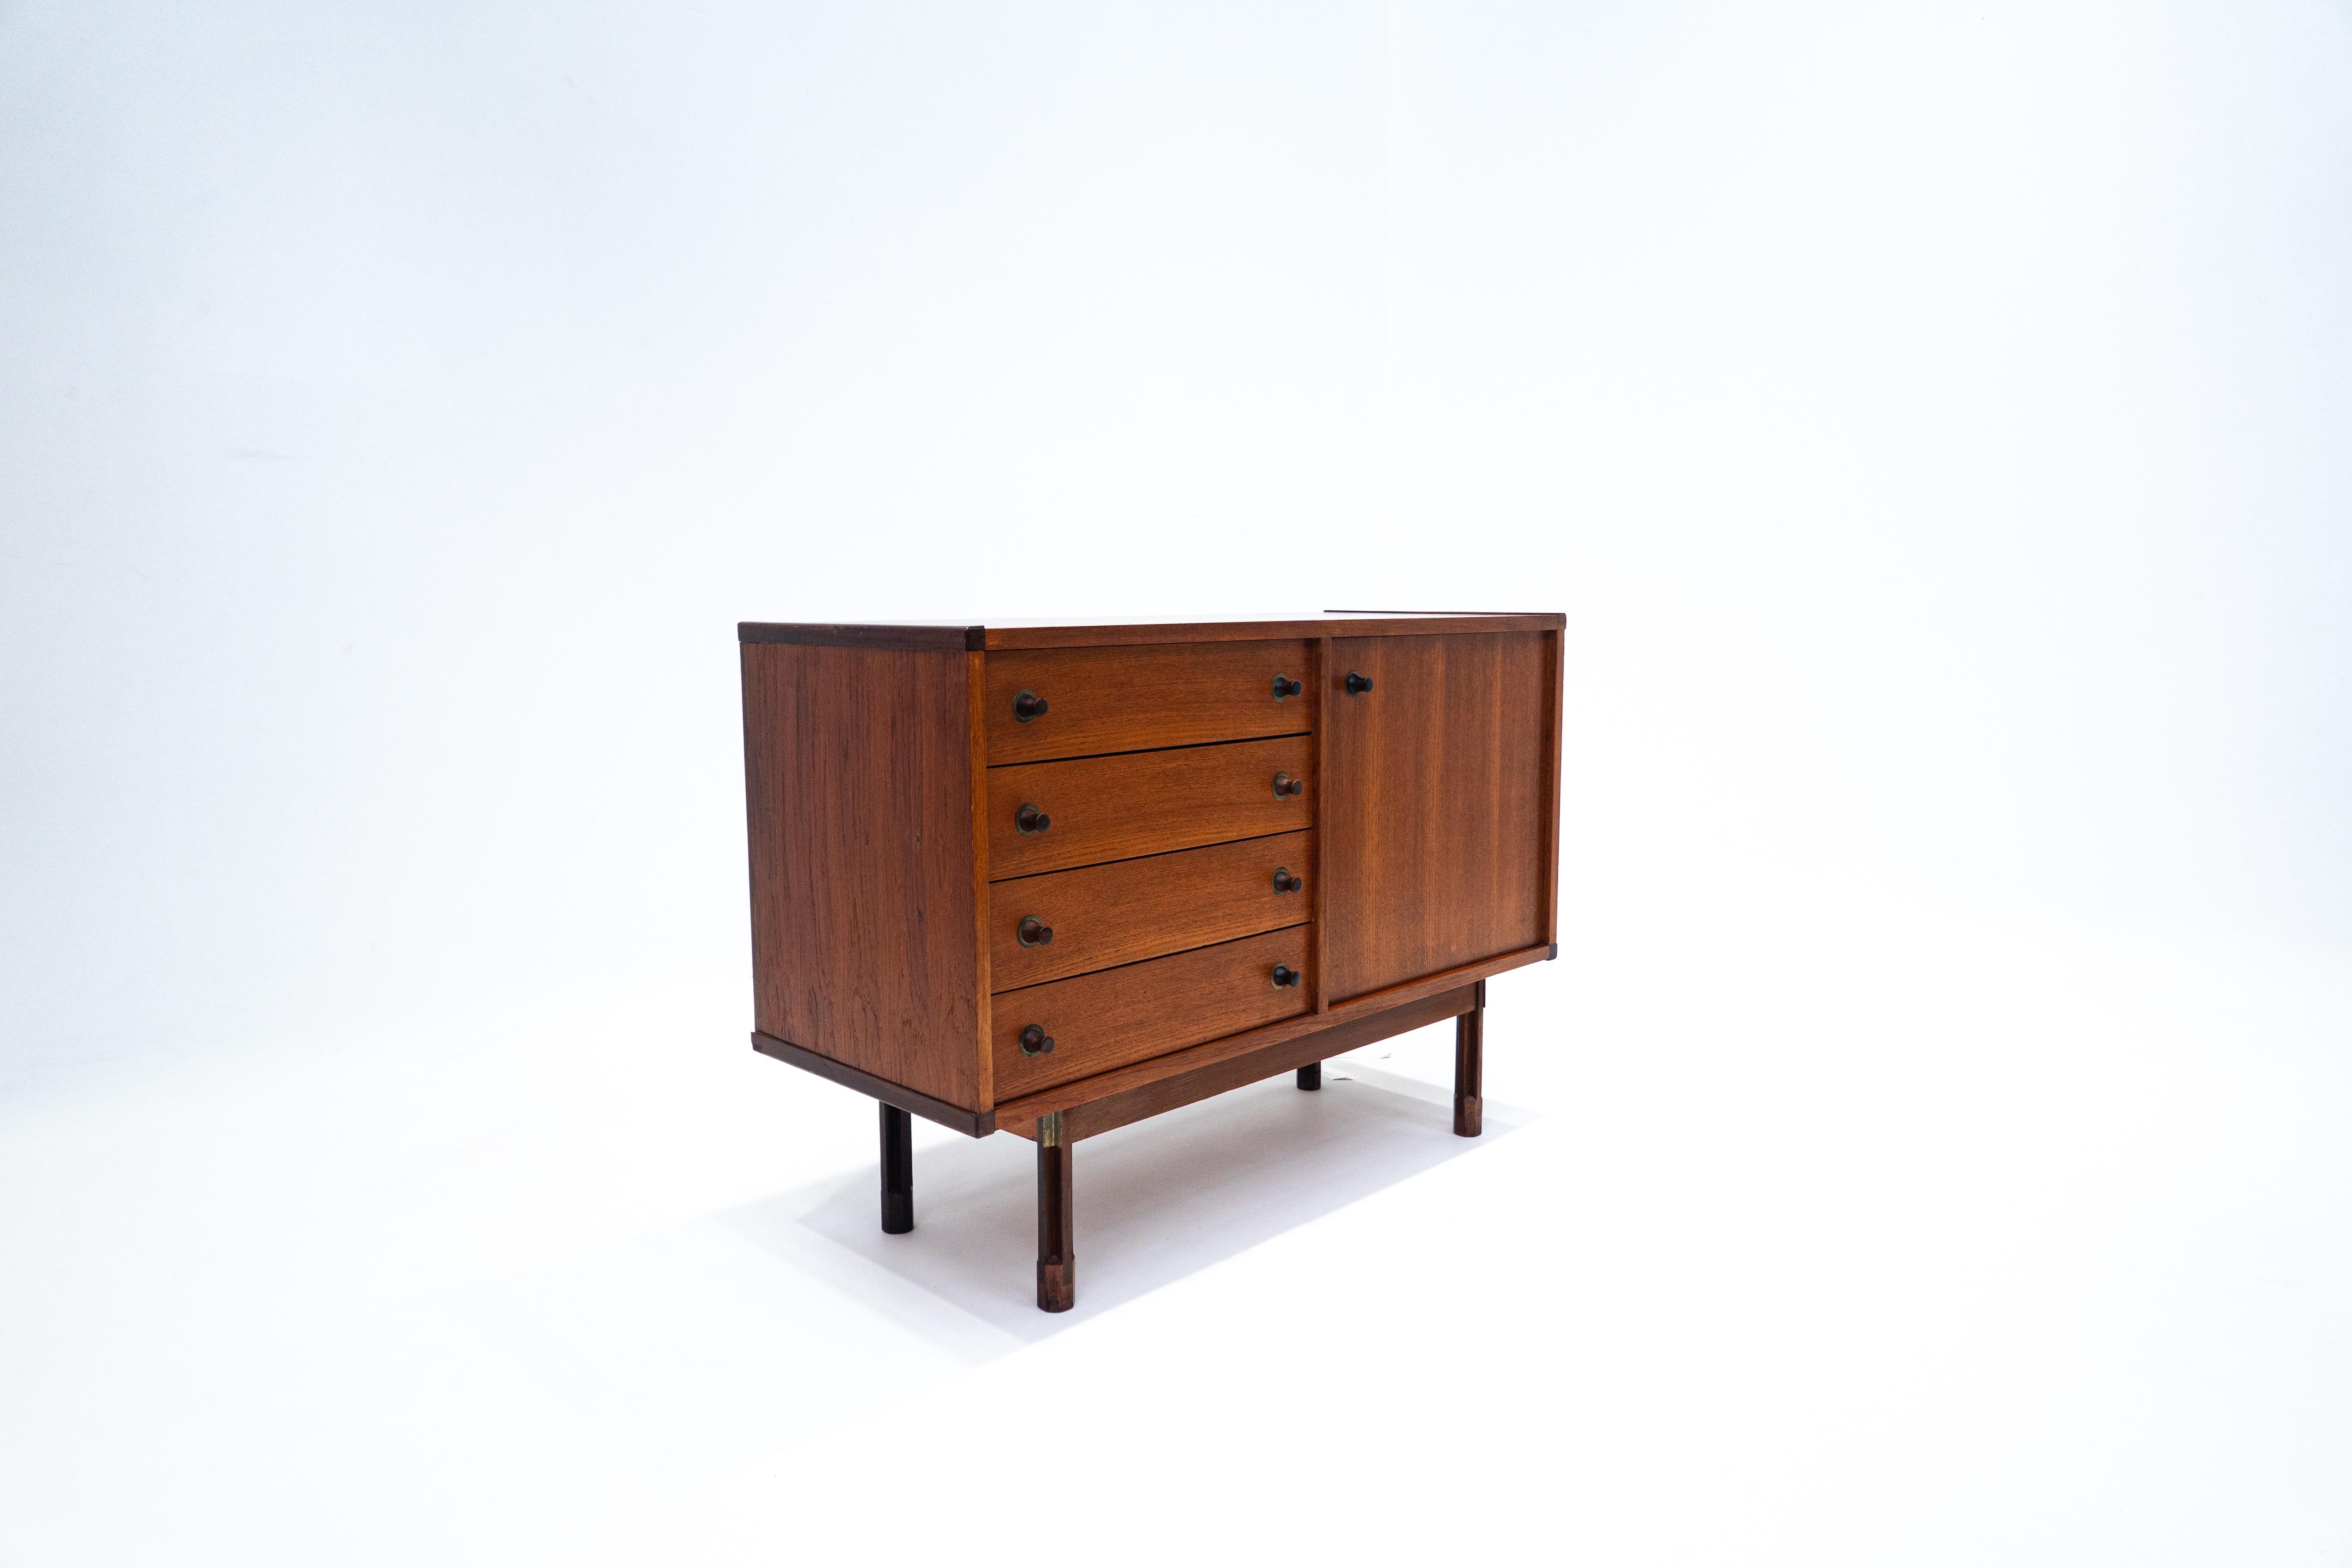 Mid-Century Modern Italian wooden chest of drawers, 1960s.